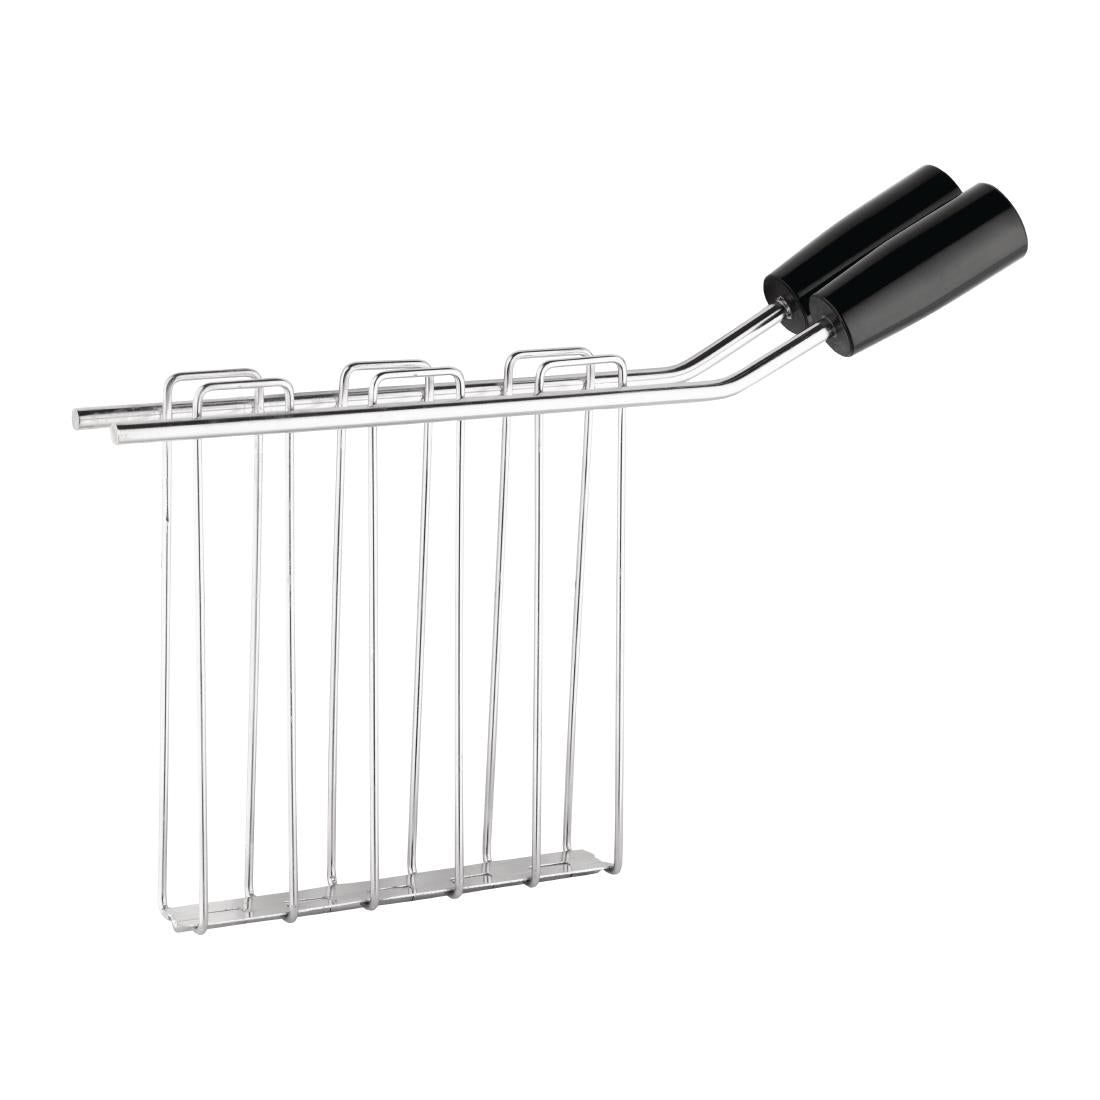 FS746 Rowlett Sandwich Cage (Pack of 2) JD Catering Equipment Solutions Ltd